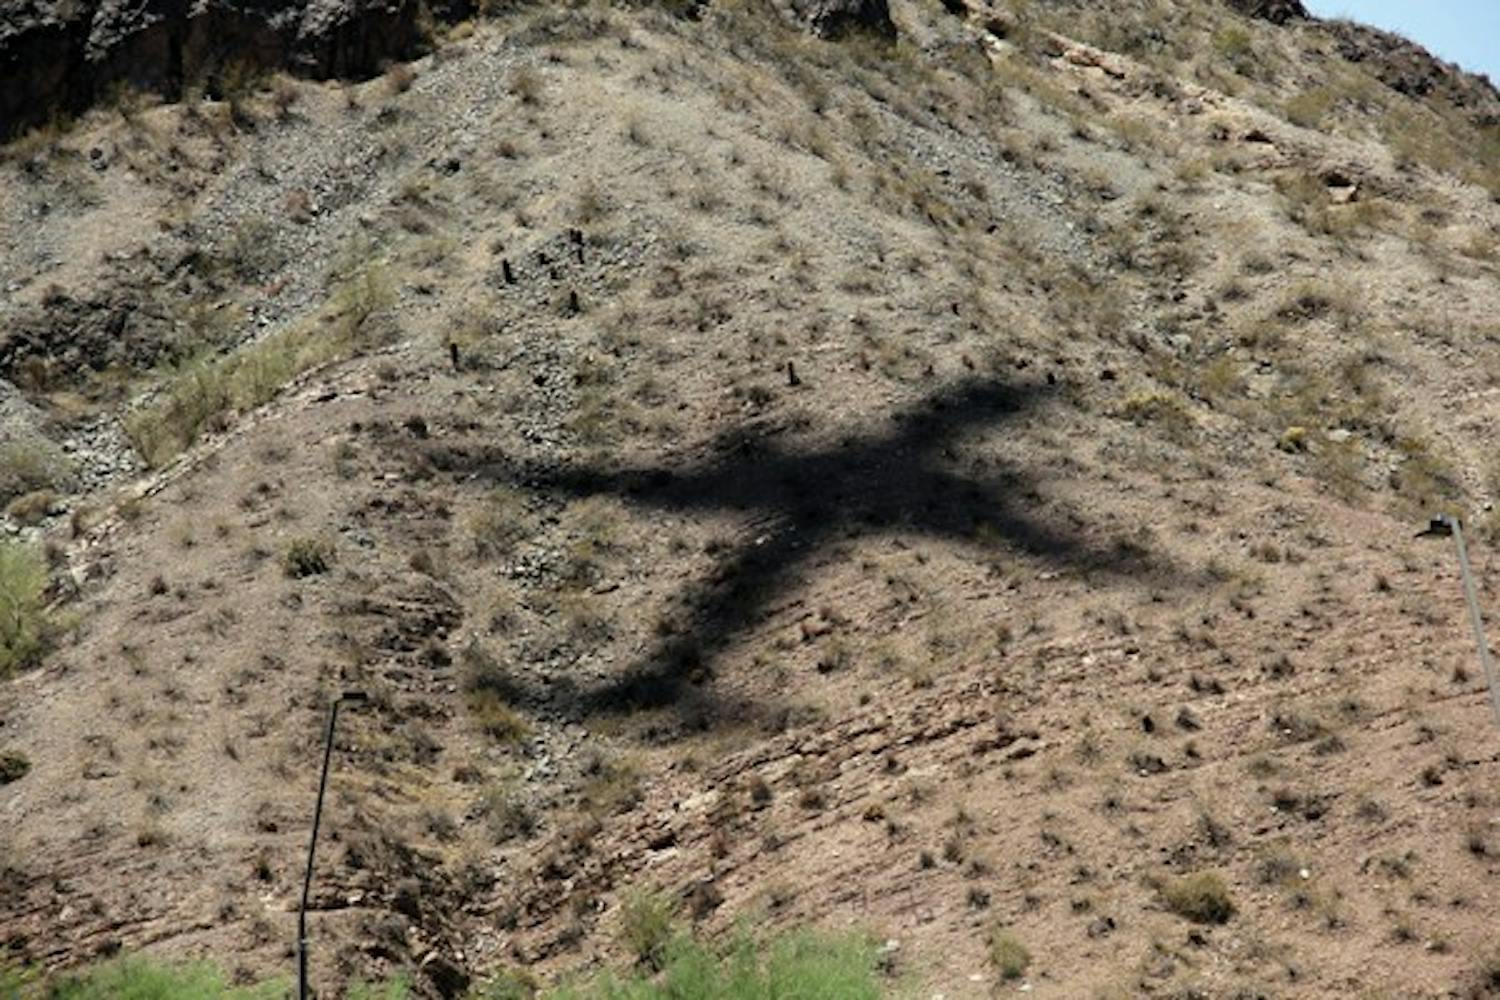 As a commerical airliner heads in to land at Phoenix Skyharbor International Airport Sunday morning, it casts a large shadow on Tempe's Hayden Butte, locally known as A-Mountain. (Photo by Shawn Raymundo)